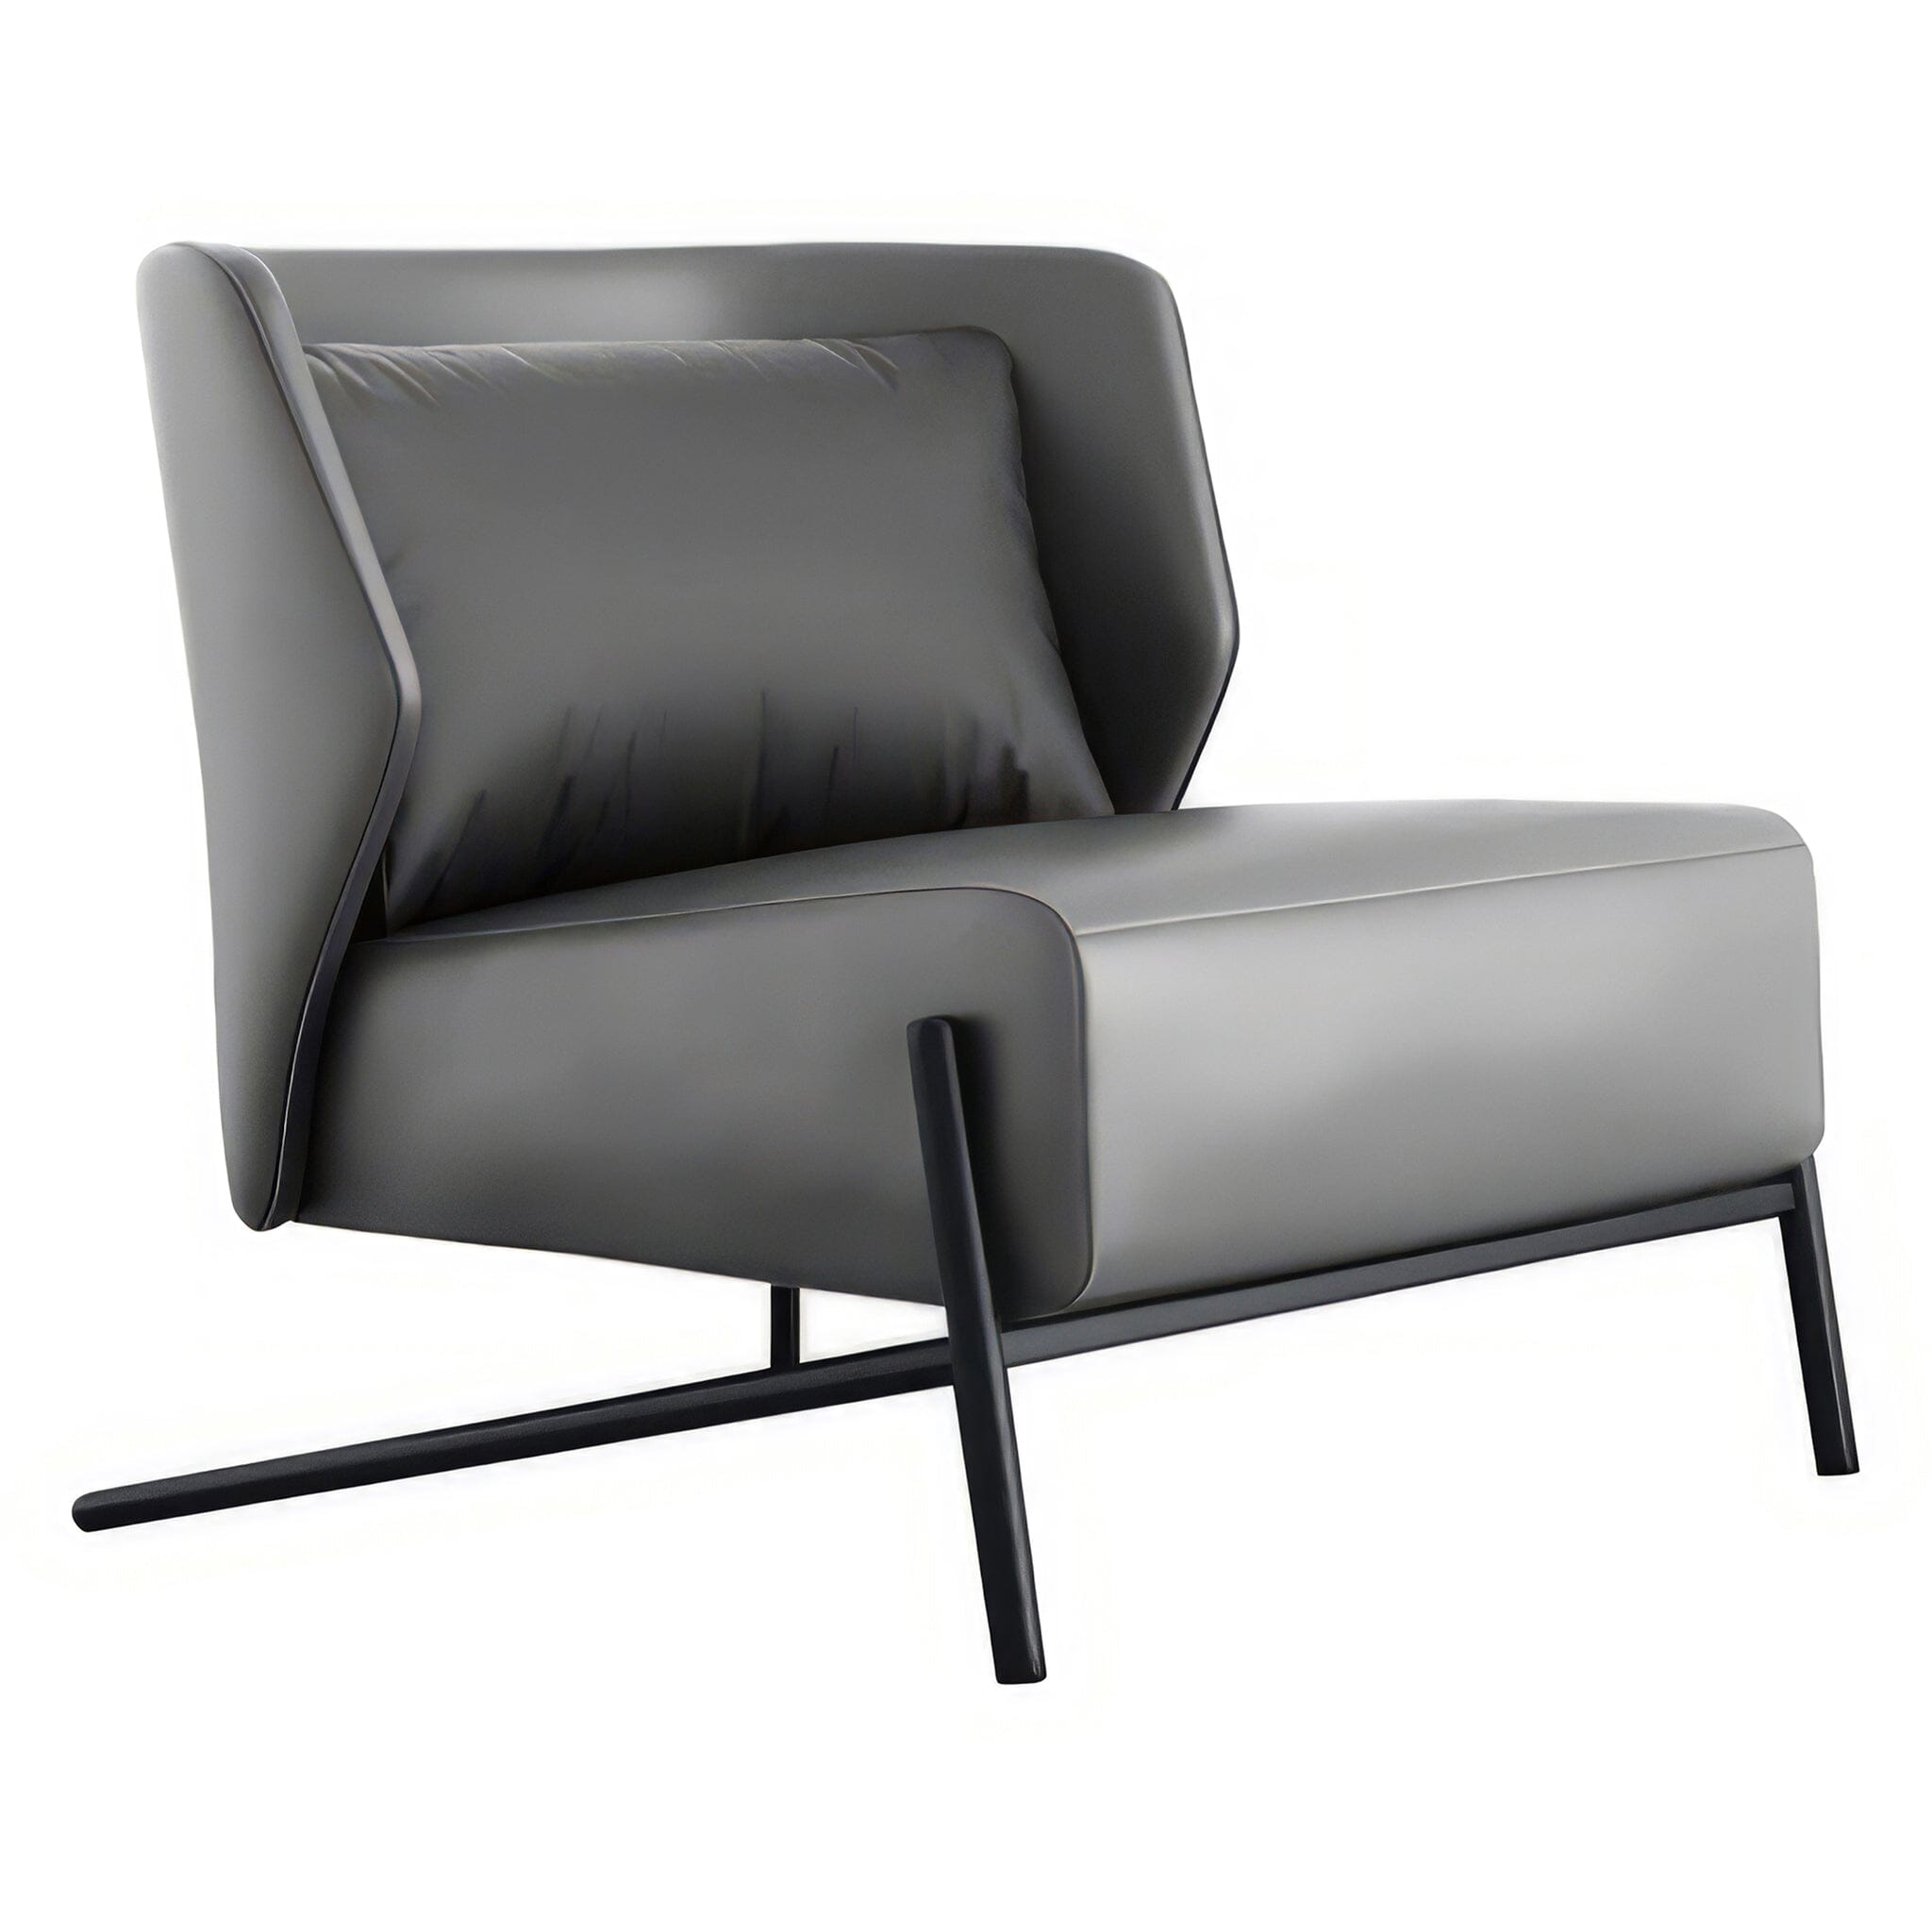 Estelle Occasional Chair Occasional Chair Charcoal Grey 